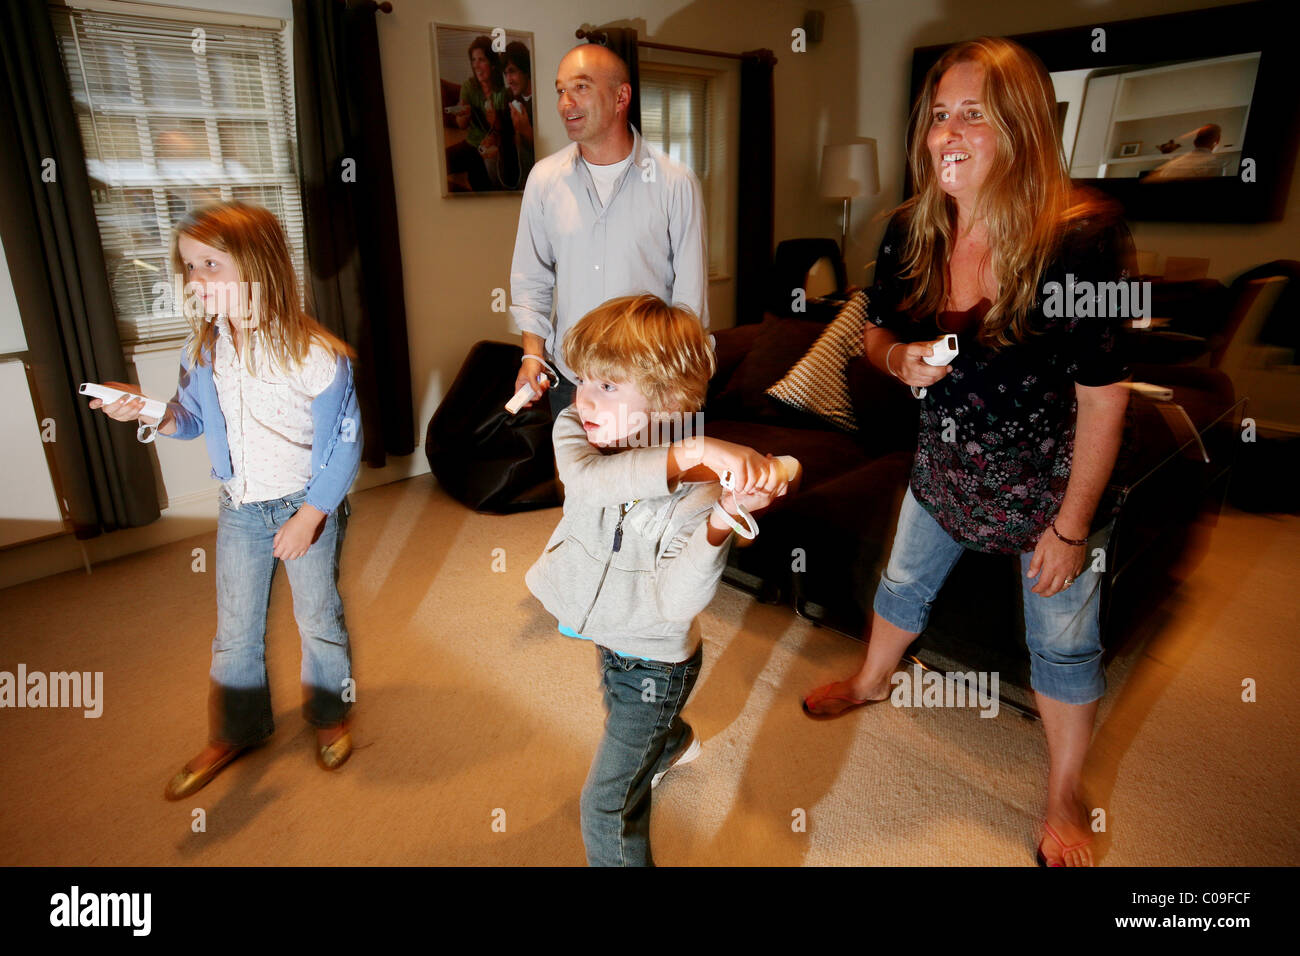 Family play Wii home video game console together in their sitting room, London, England, UK. Photo:Jeff Gilbert Stock Photo